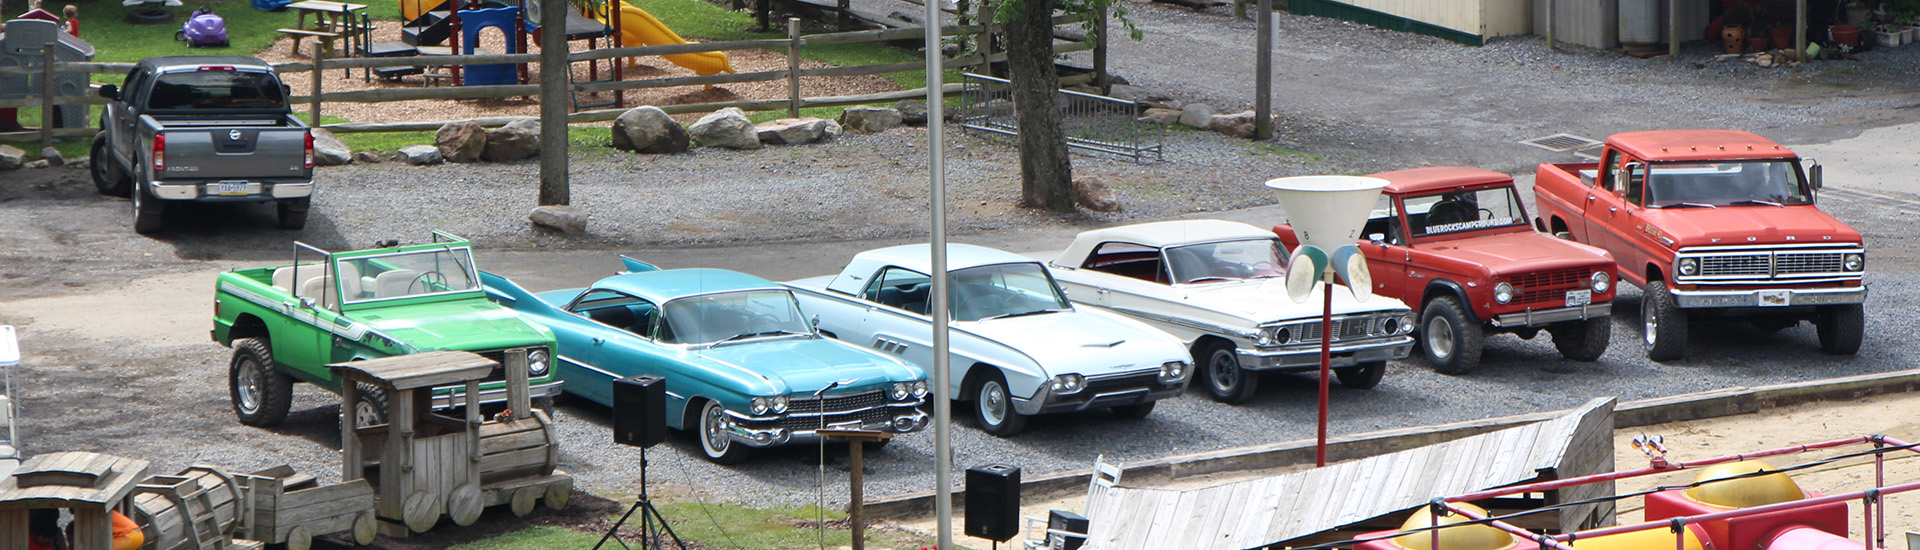 An array of classic cars parked by the playground.